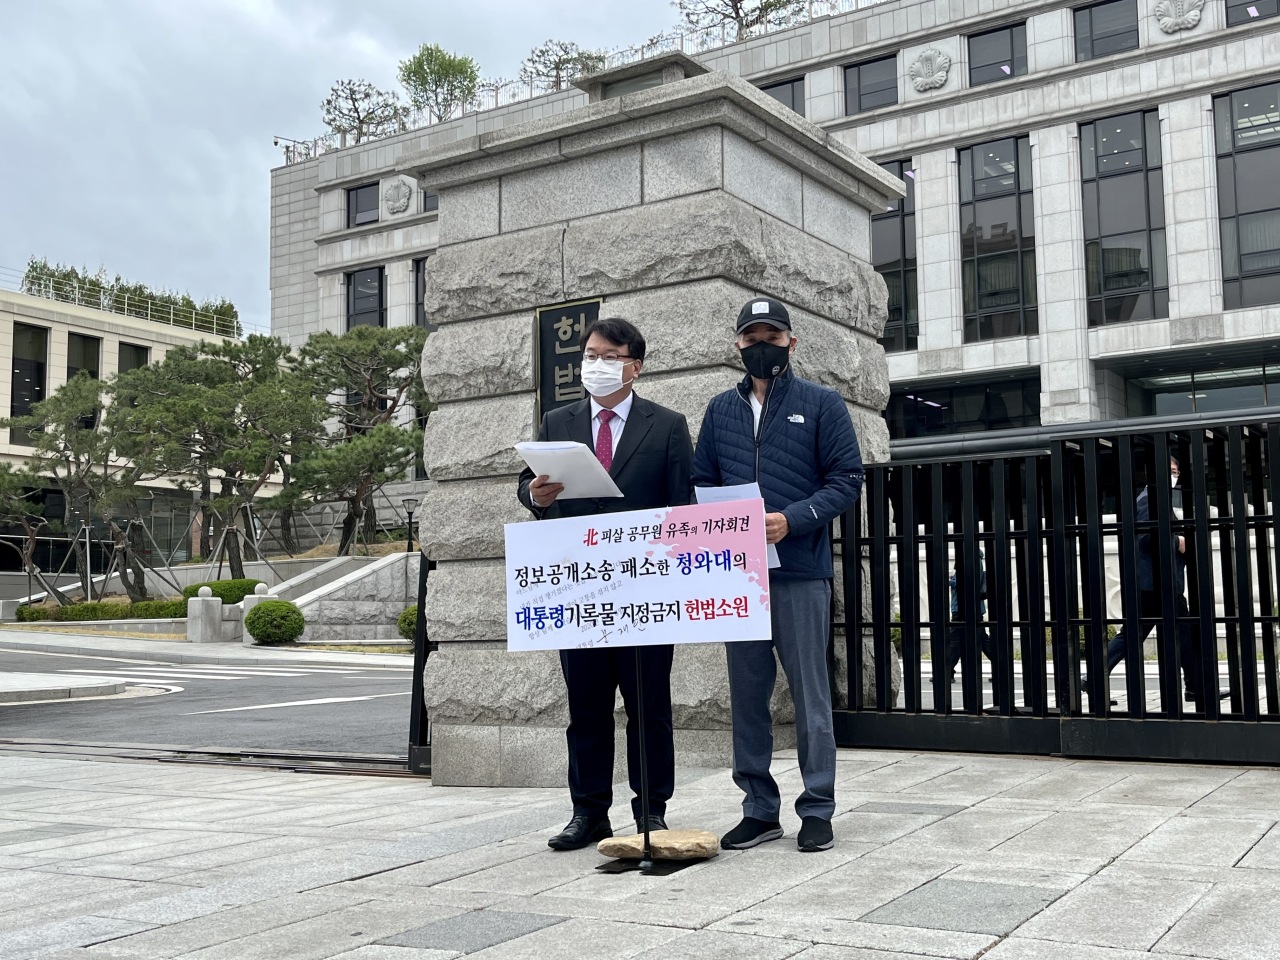 Lee Rae-jin (right), brother of an official killed by North Korea’s military while drifting in the sea, and Kim Ki-yun, a lawyer representing the family, speak to reporters outside the Constitutional Court in central Seoul on Wednesday. (Kim Arin/The Korea Herald)